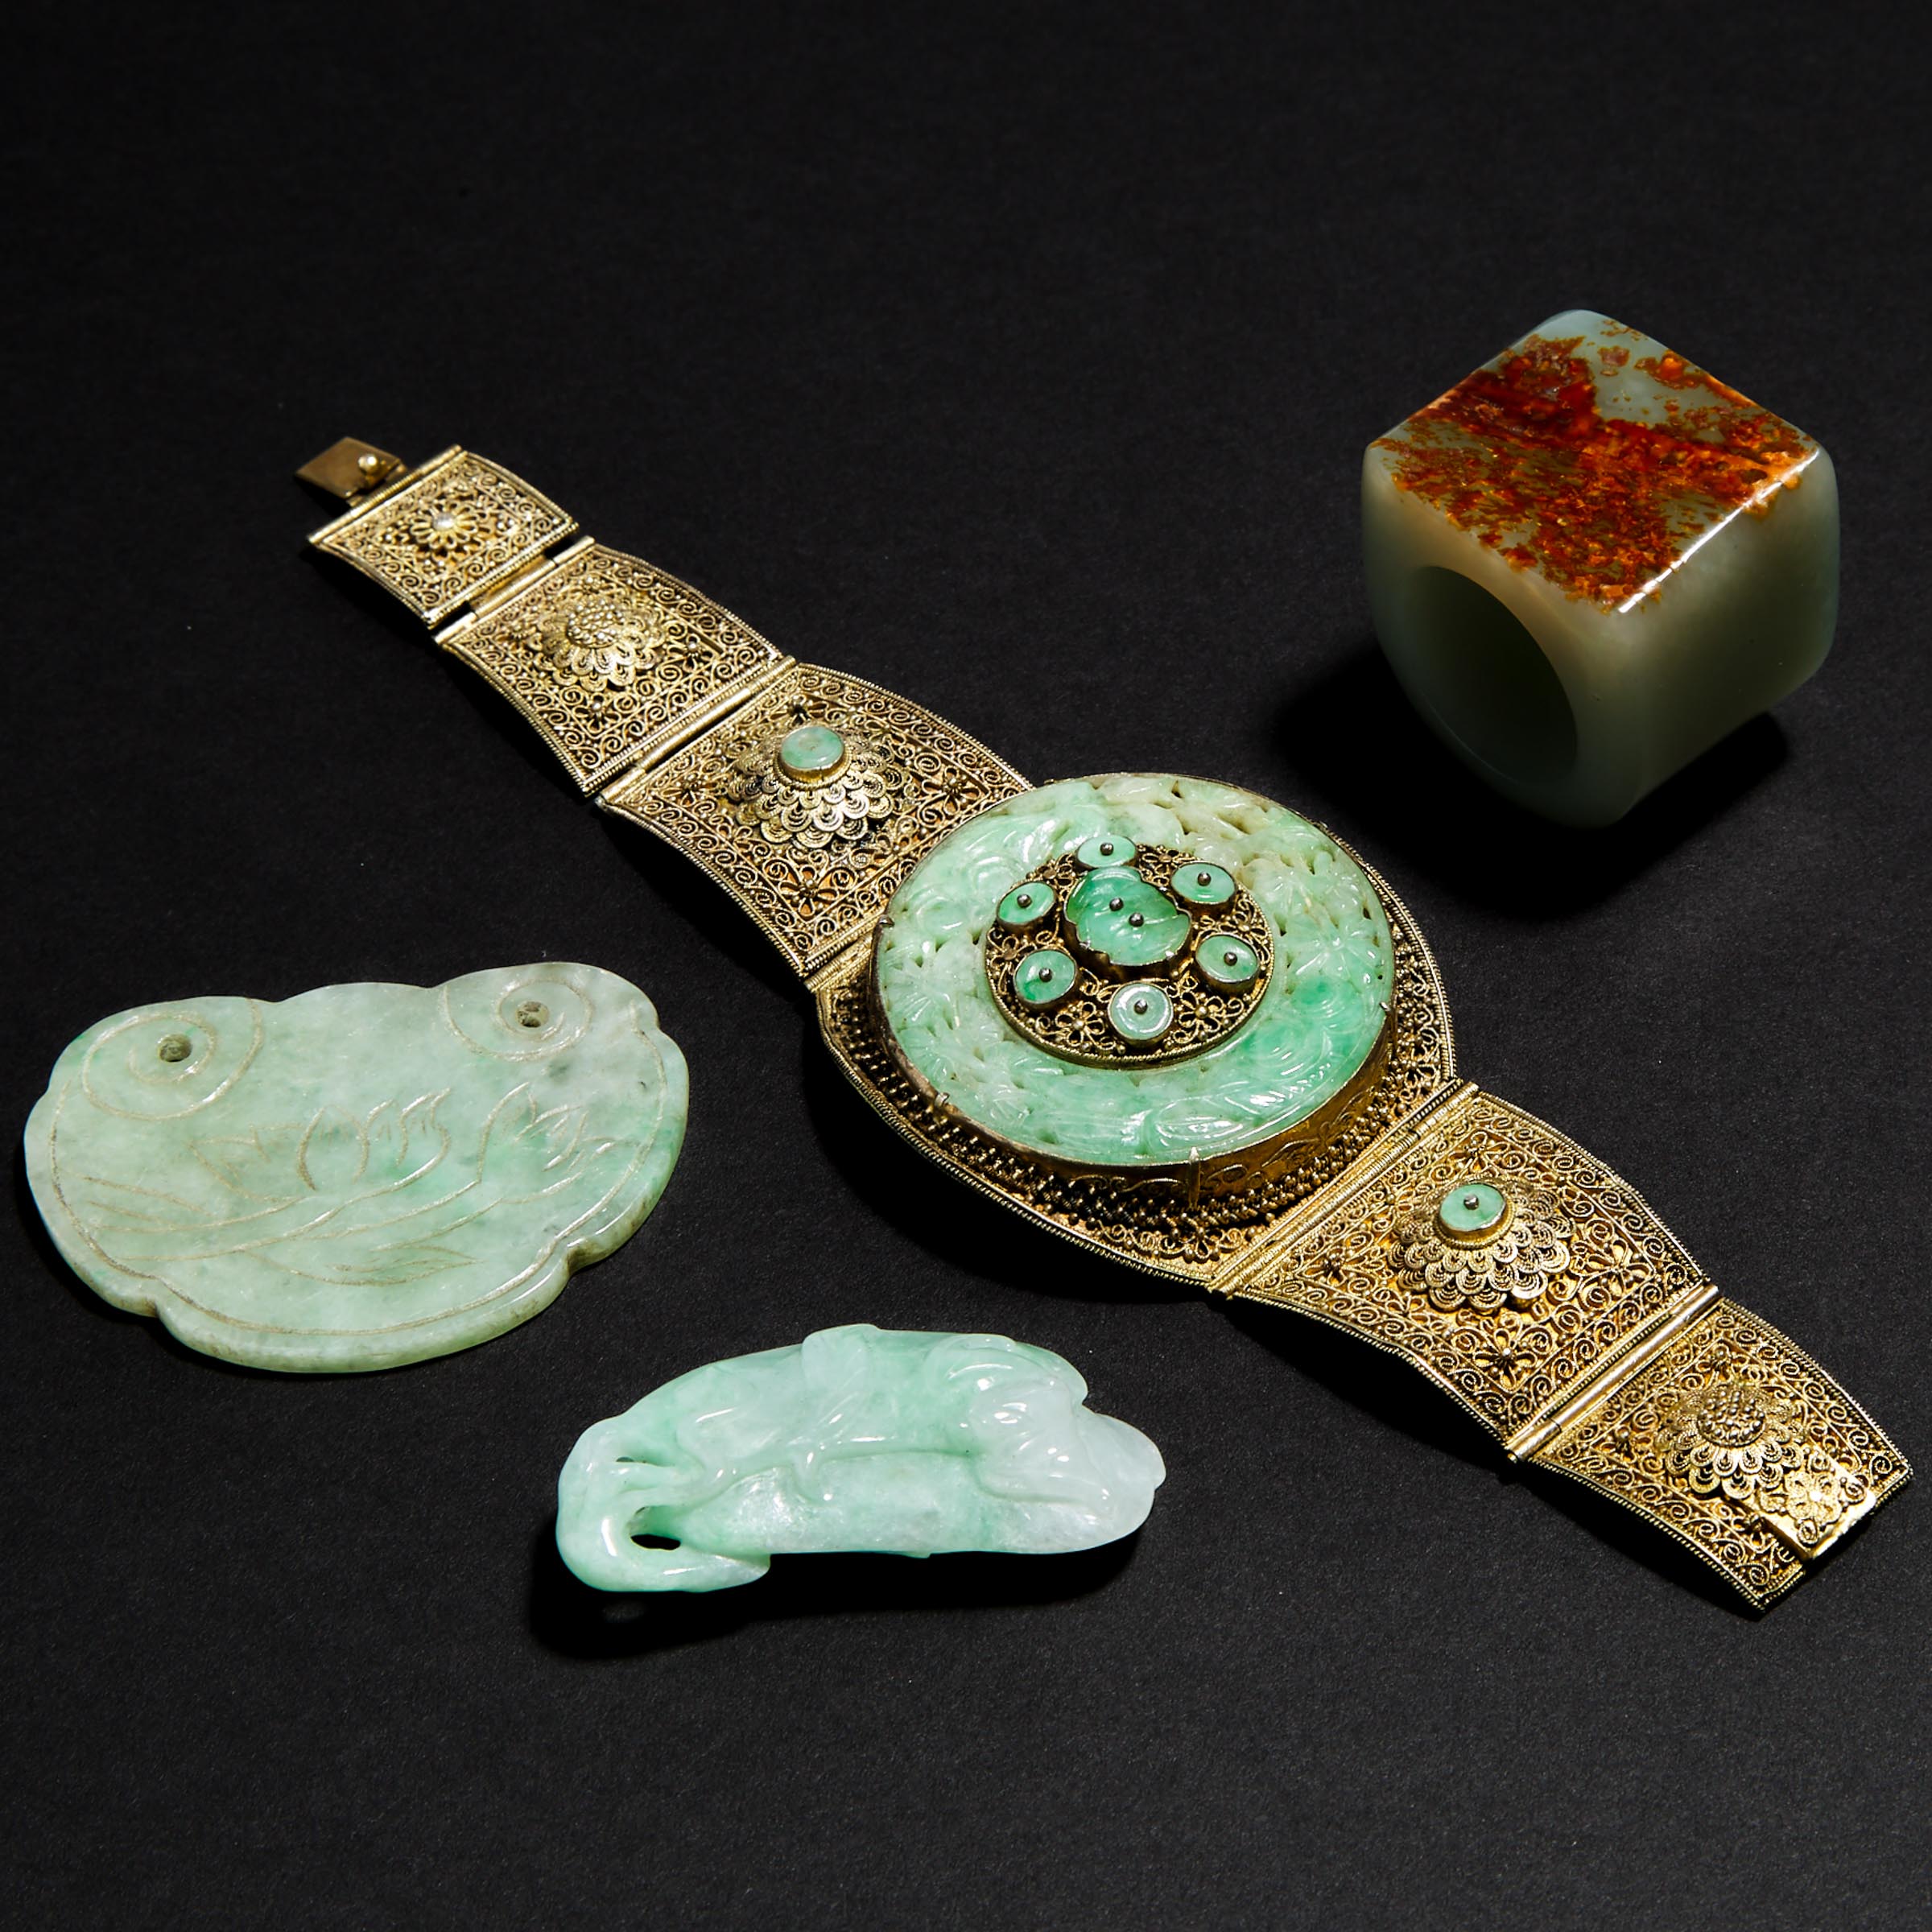 A Silver-Gilt Filigree and Jadeite Bangle, together with Two Jadeite Pendants and a Pale Celadon Jade Archer Ring